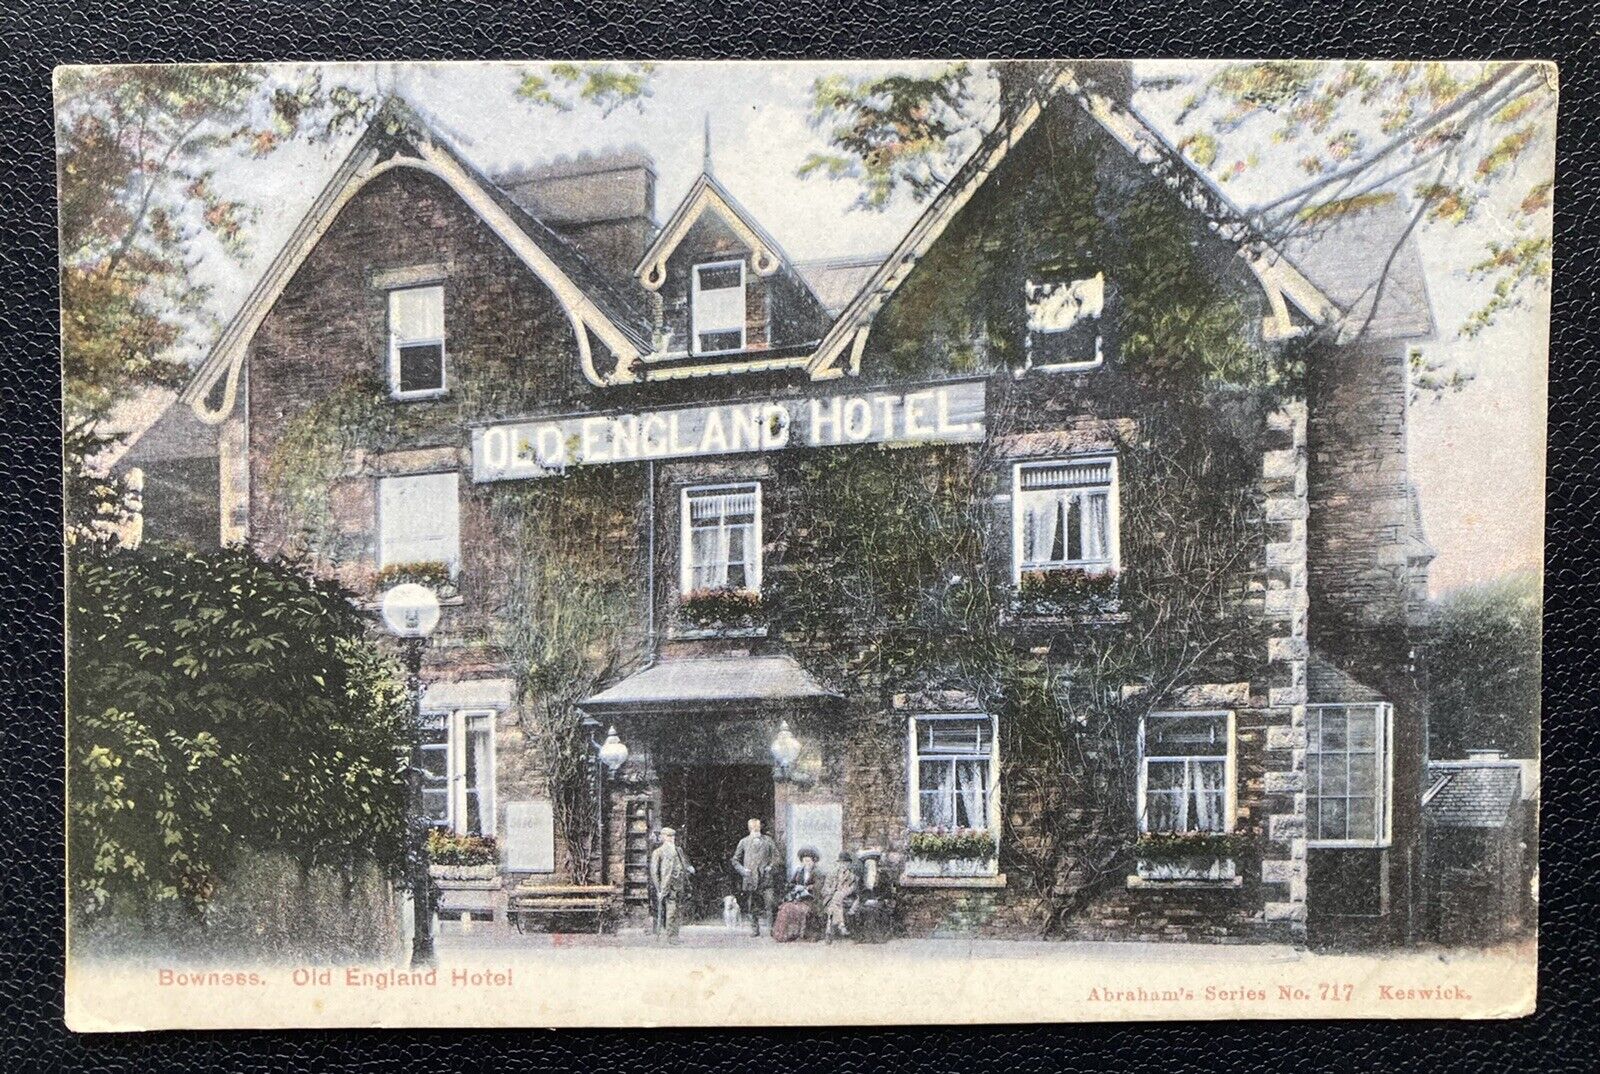 House Clearance - Bowness on Windermere - Old England Hotel - Lake District - A Vintage 1911 p/c